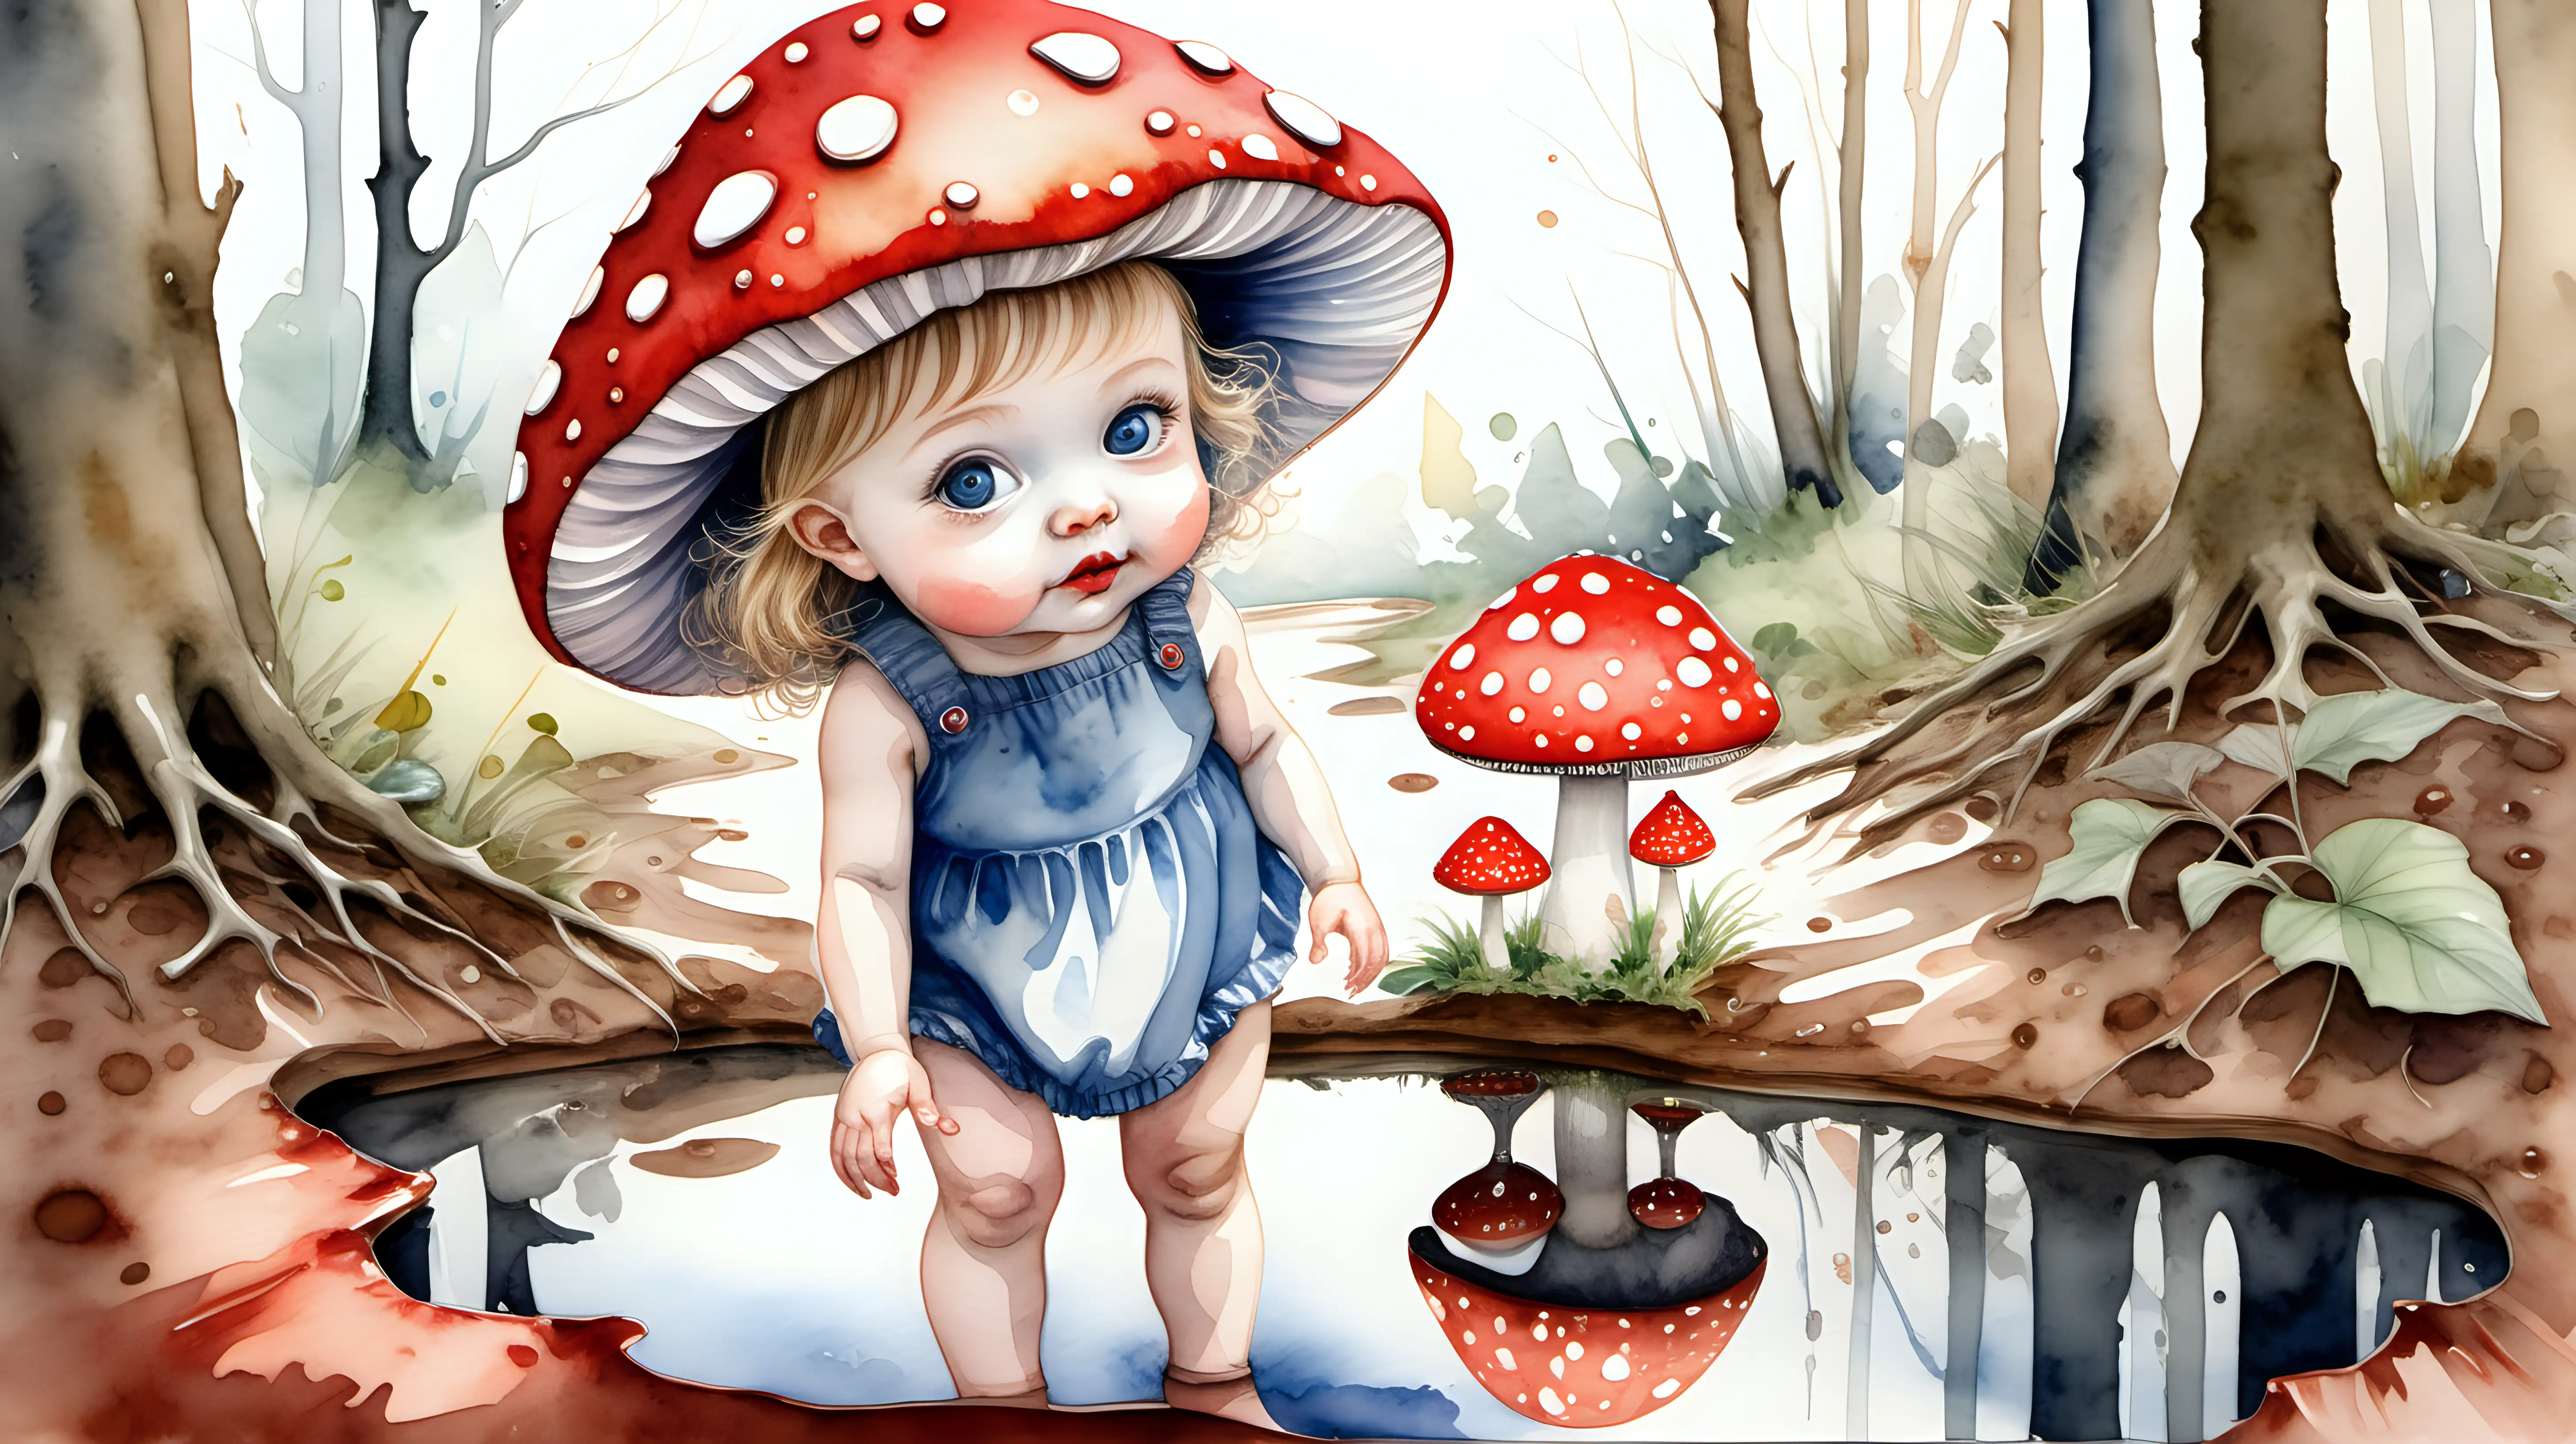 Enchanting Watercolor Portrait Whimsical Baby Girl with Red Toadstool Hat in Enchanted Woods